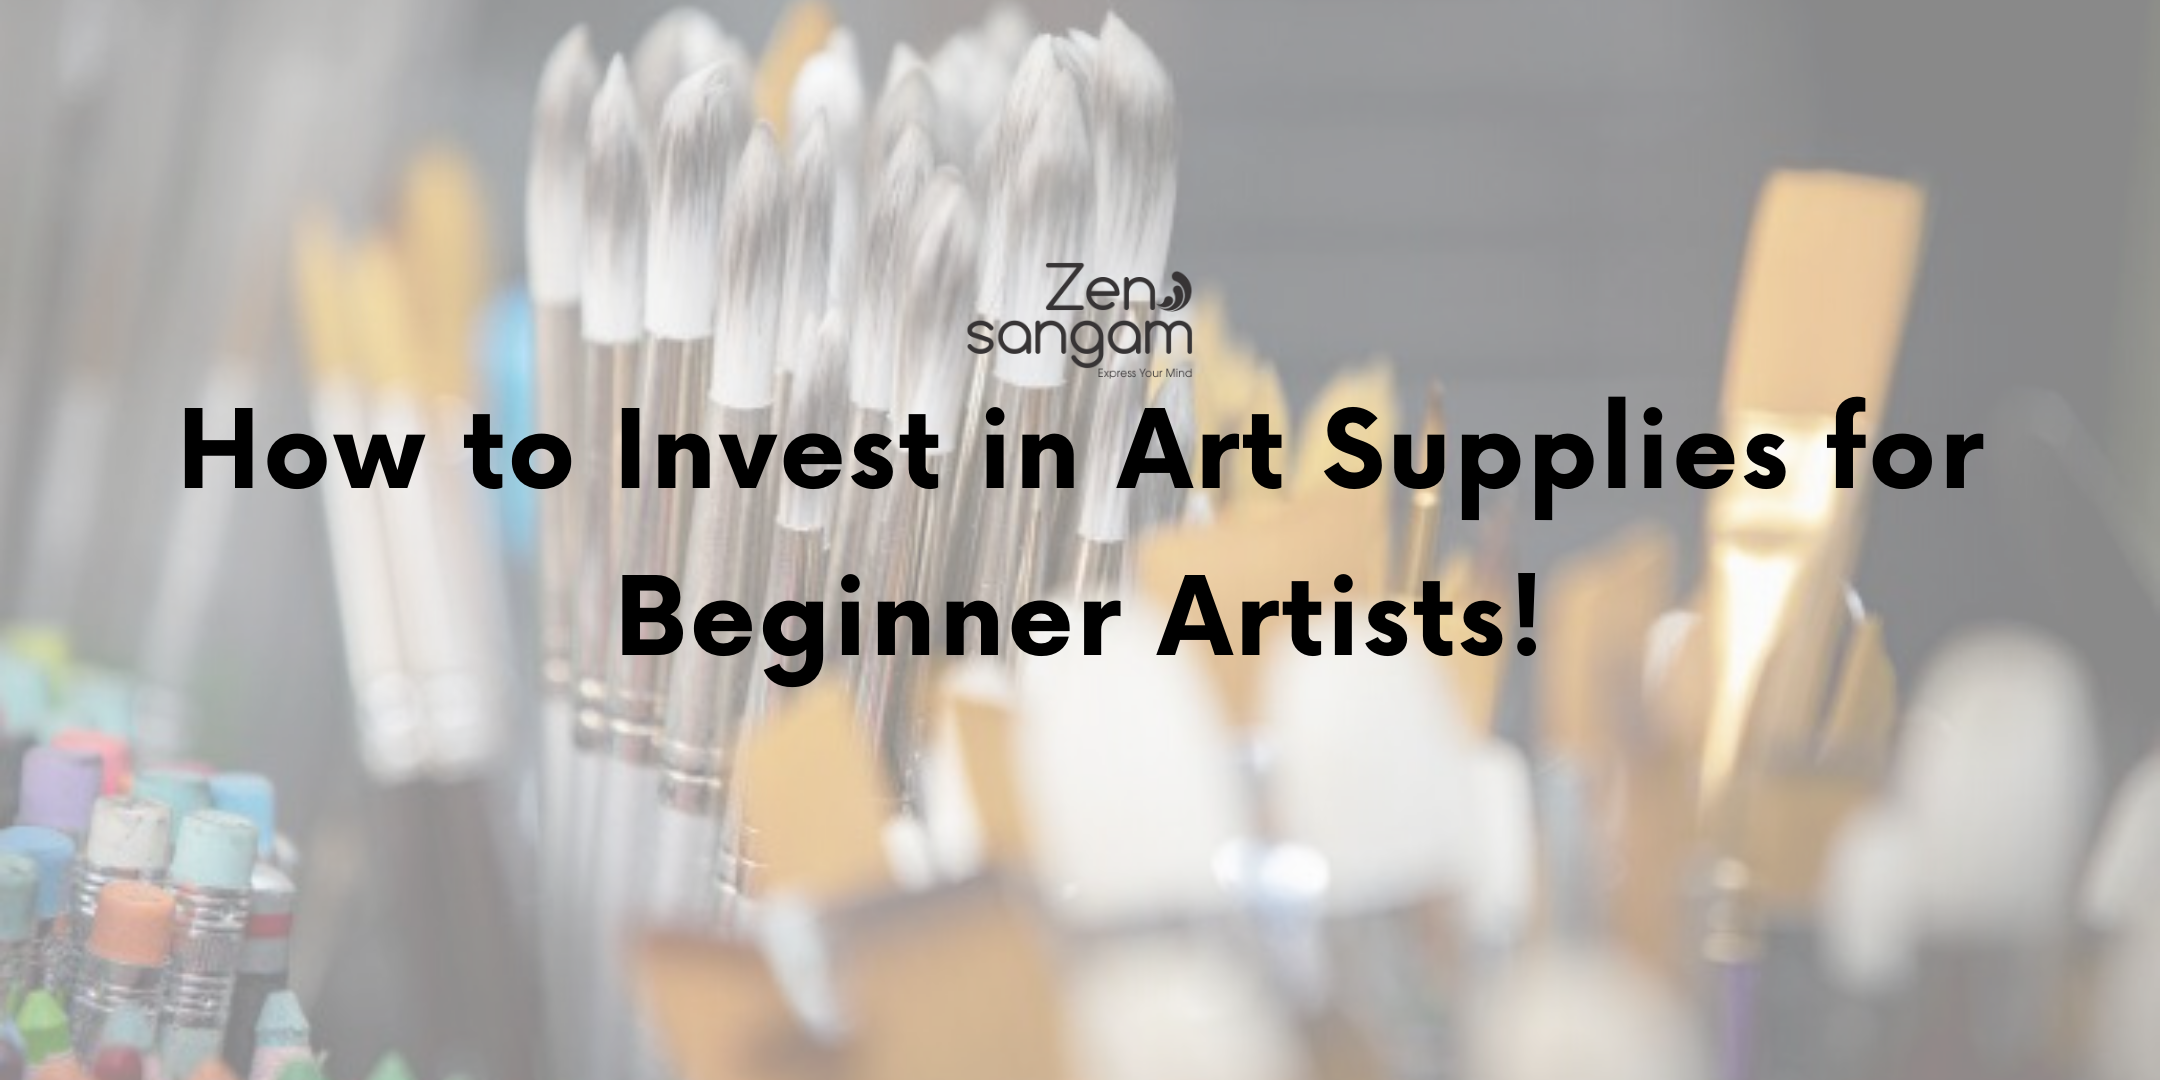 How to Invest in Art Supplies for Beginner Artists!